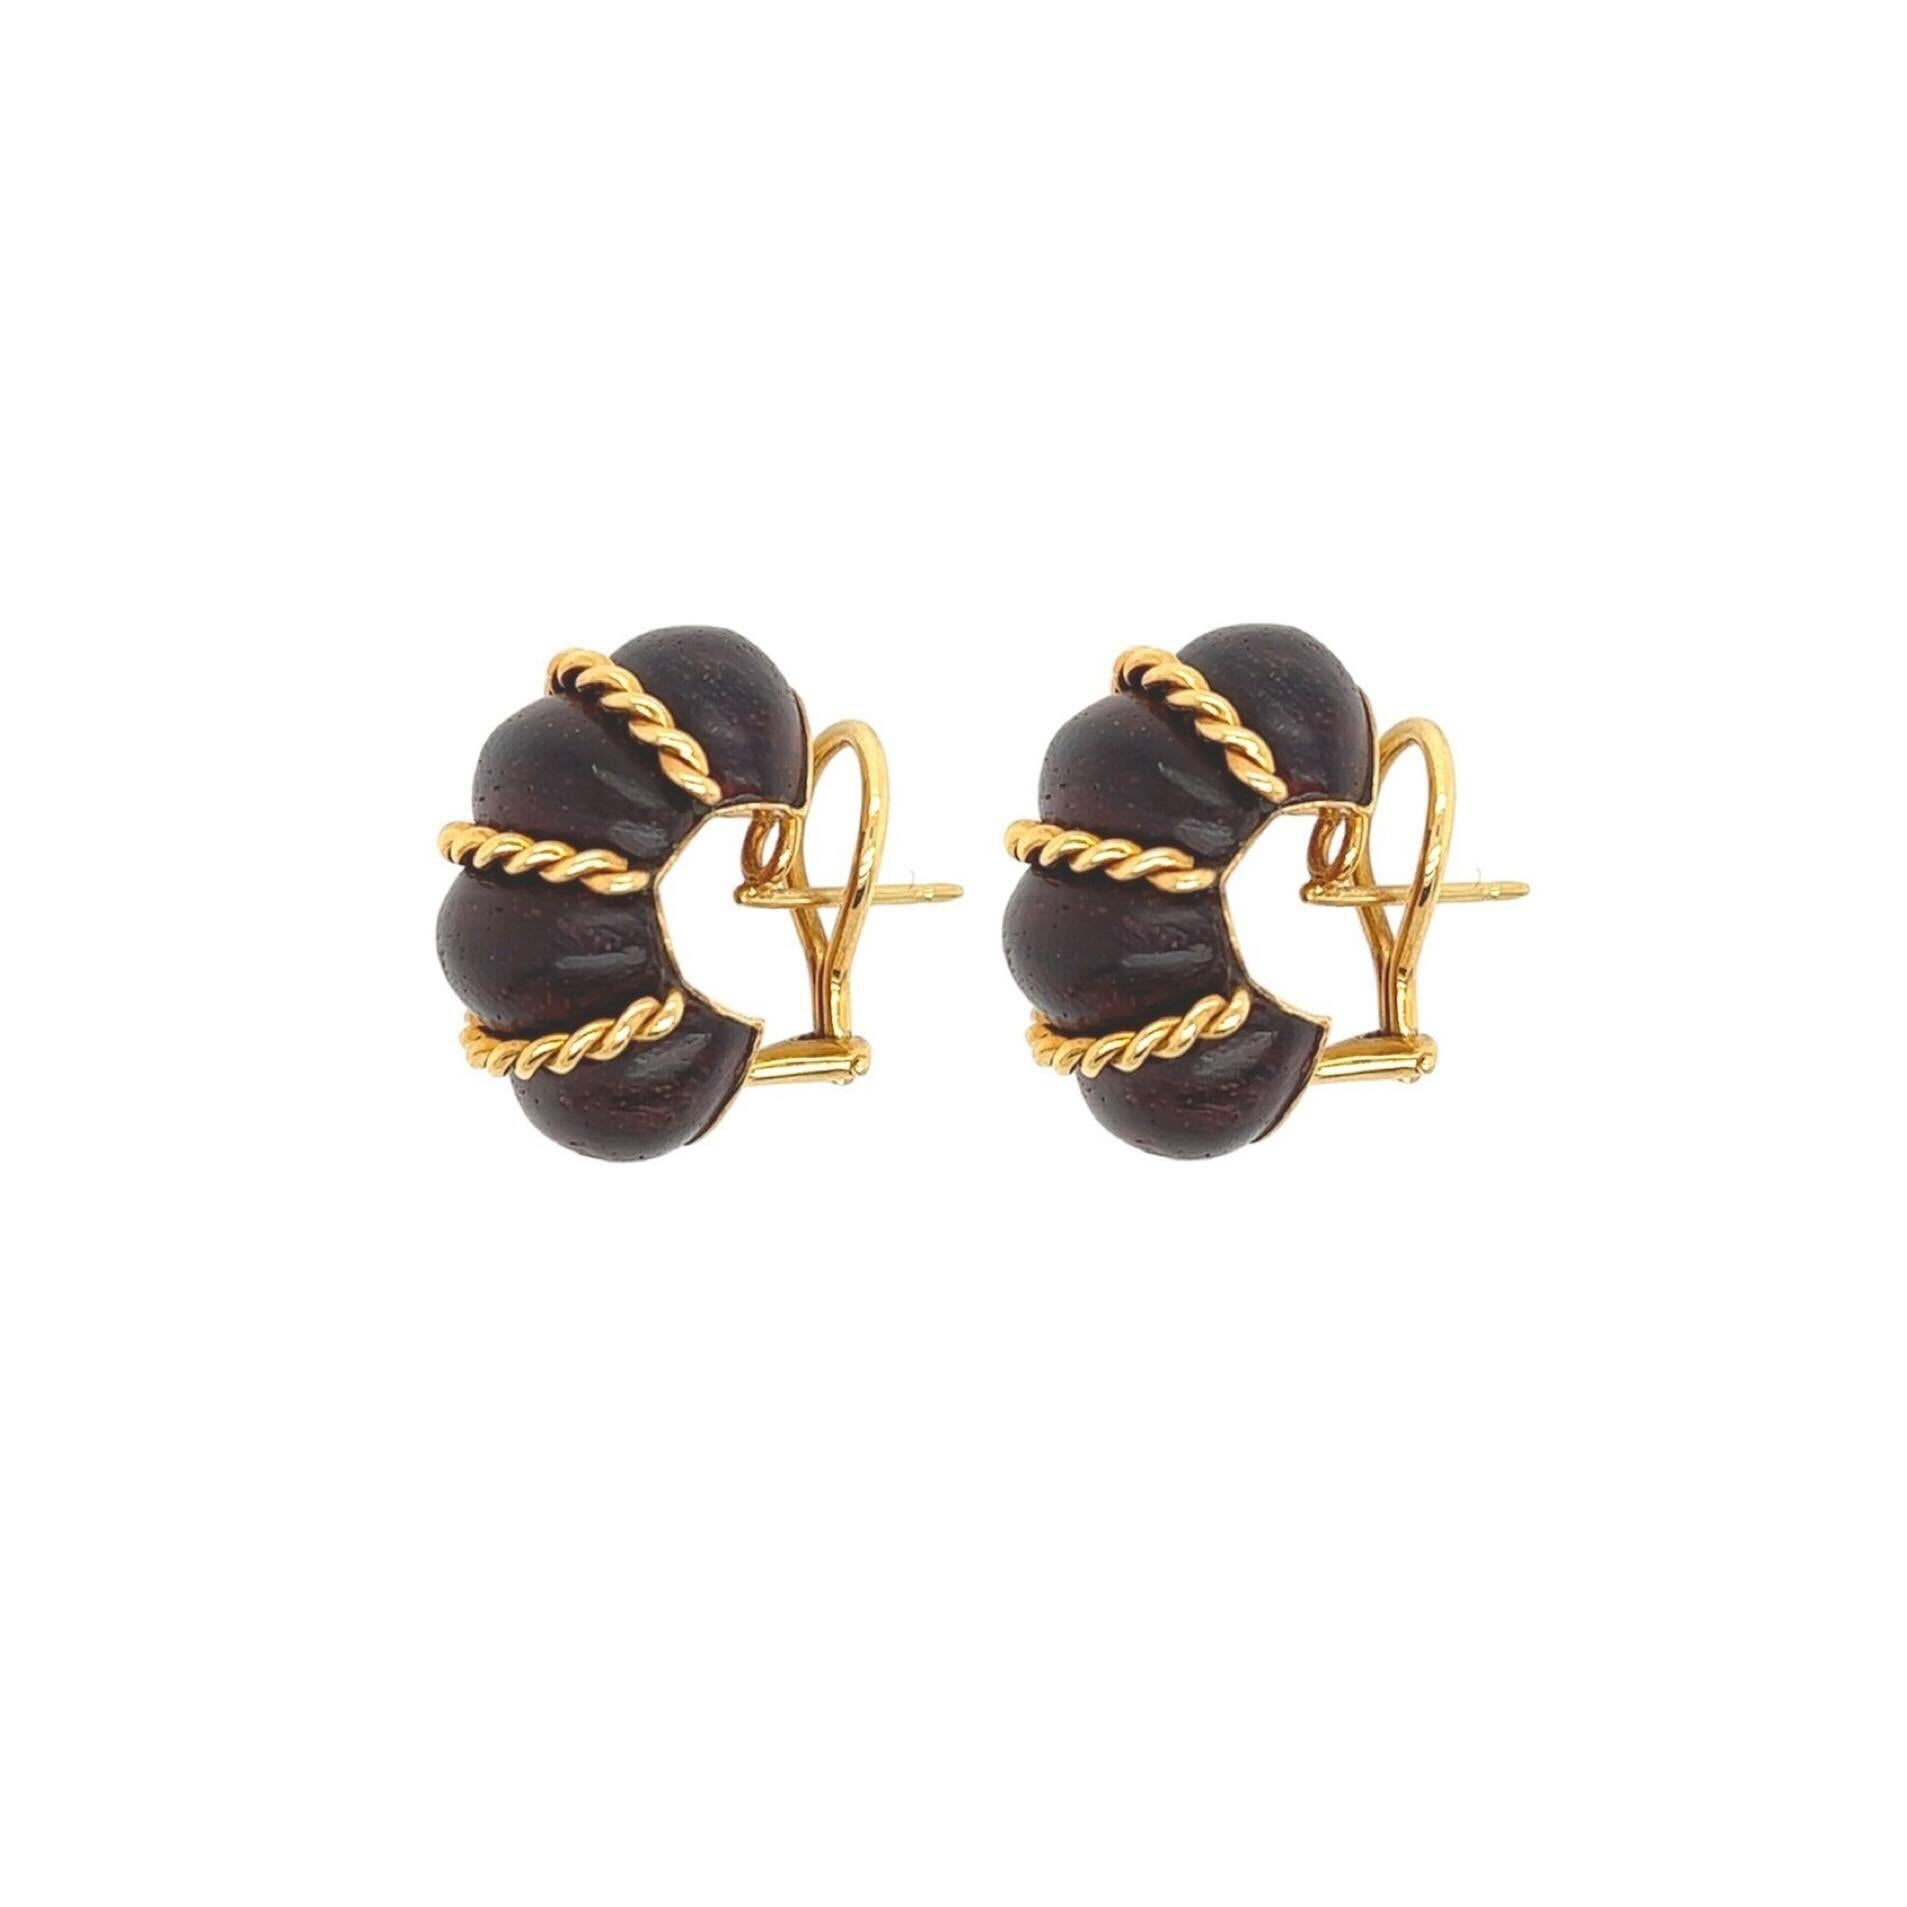 A pair of 18 karat yellow gold and wood Shrimp earrings. Seaman Schepps. Length is approximately 1 inch.  Gross weight approximately 14.80 grams.  Stamped Seaman Schepps, 750, with maker’s mark. numbered 3721.